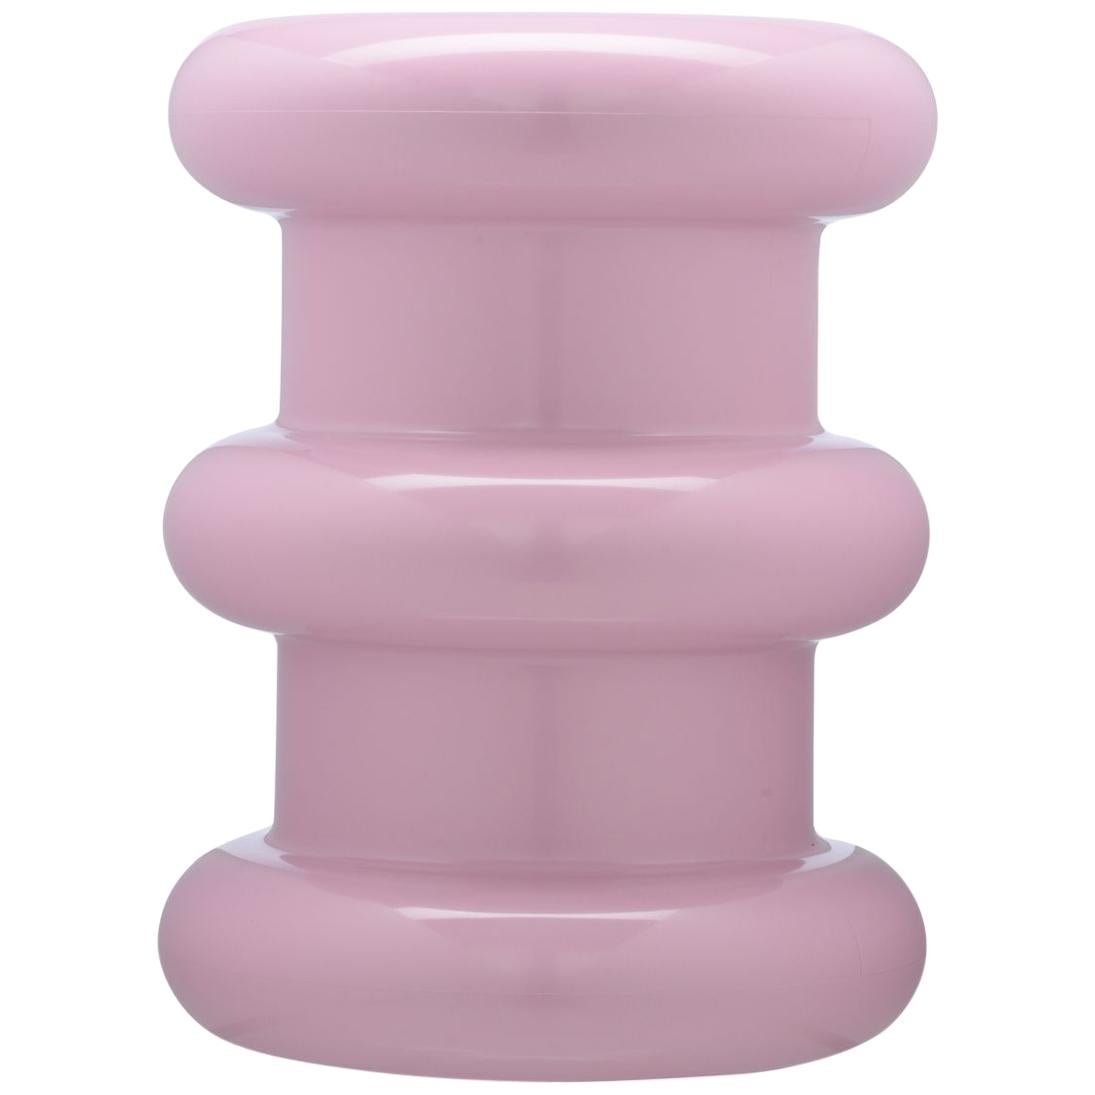 Kartell Pilastro Stool in Pink by Ettore Sottsass